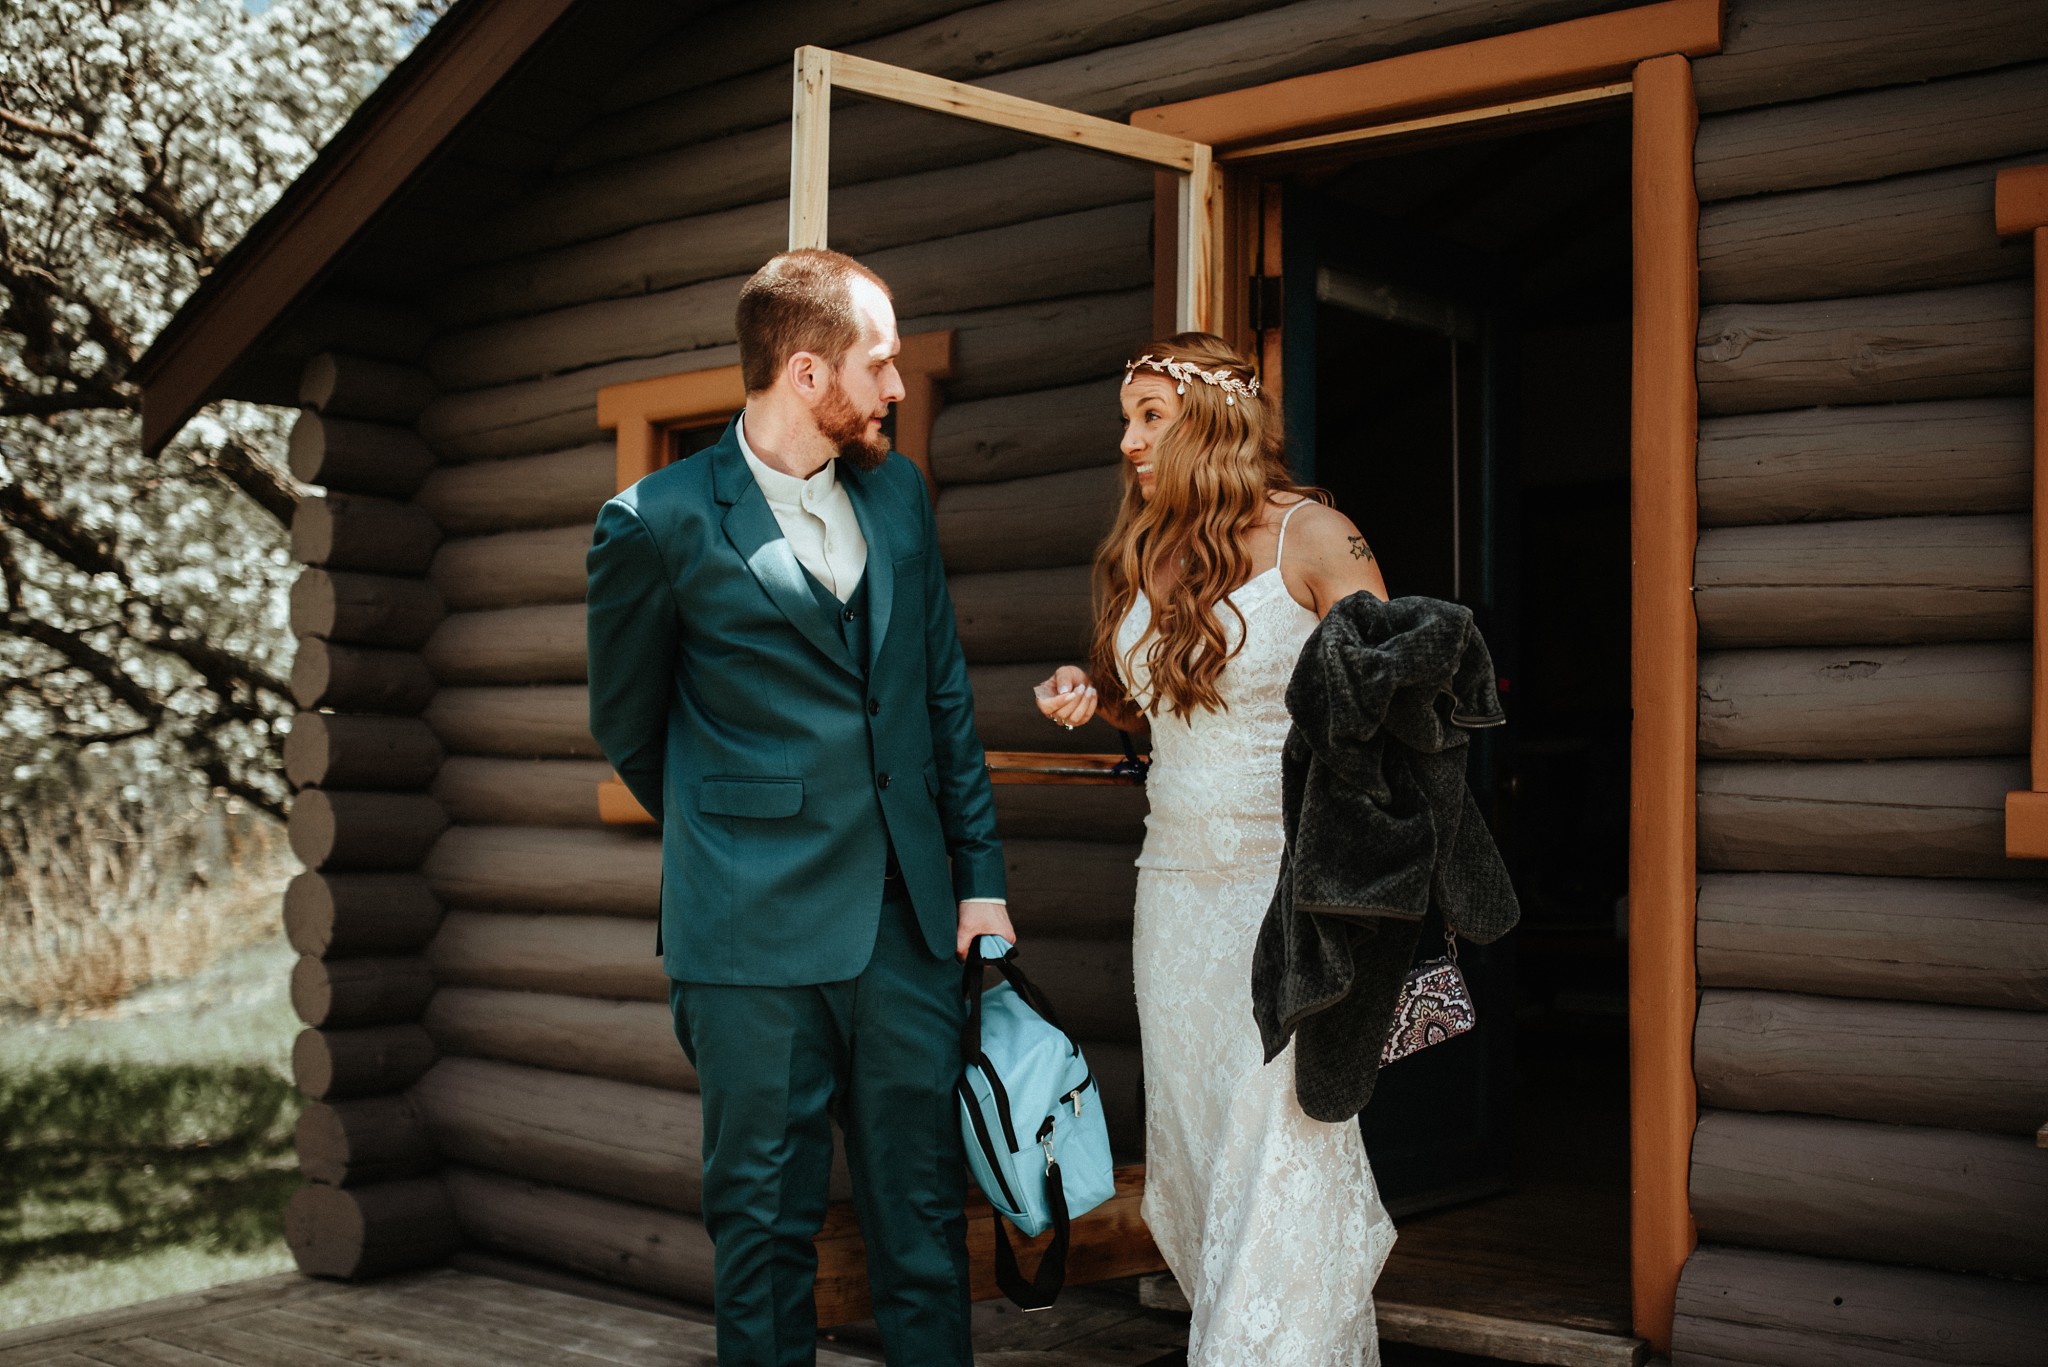 The couple leaving the cabin in excitement.